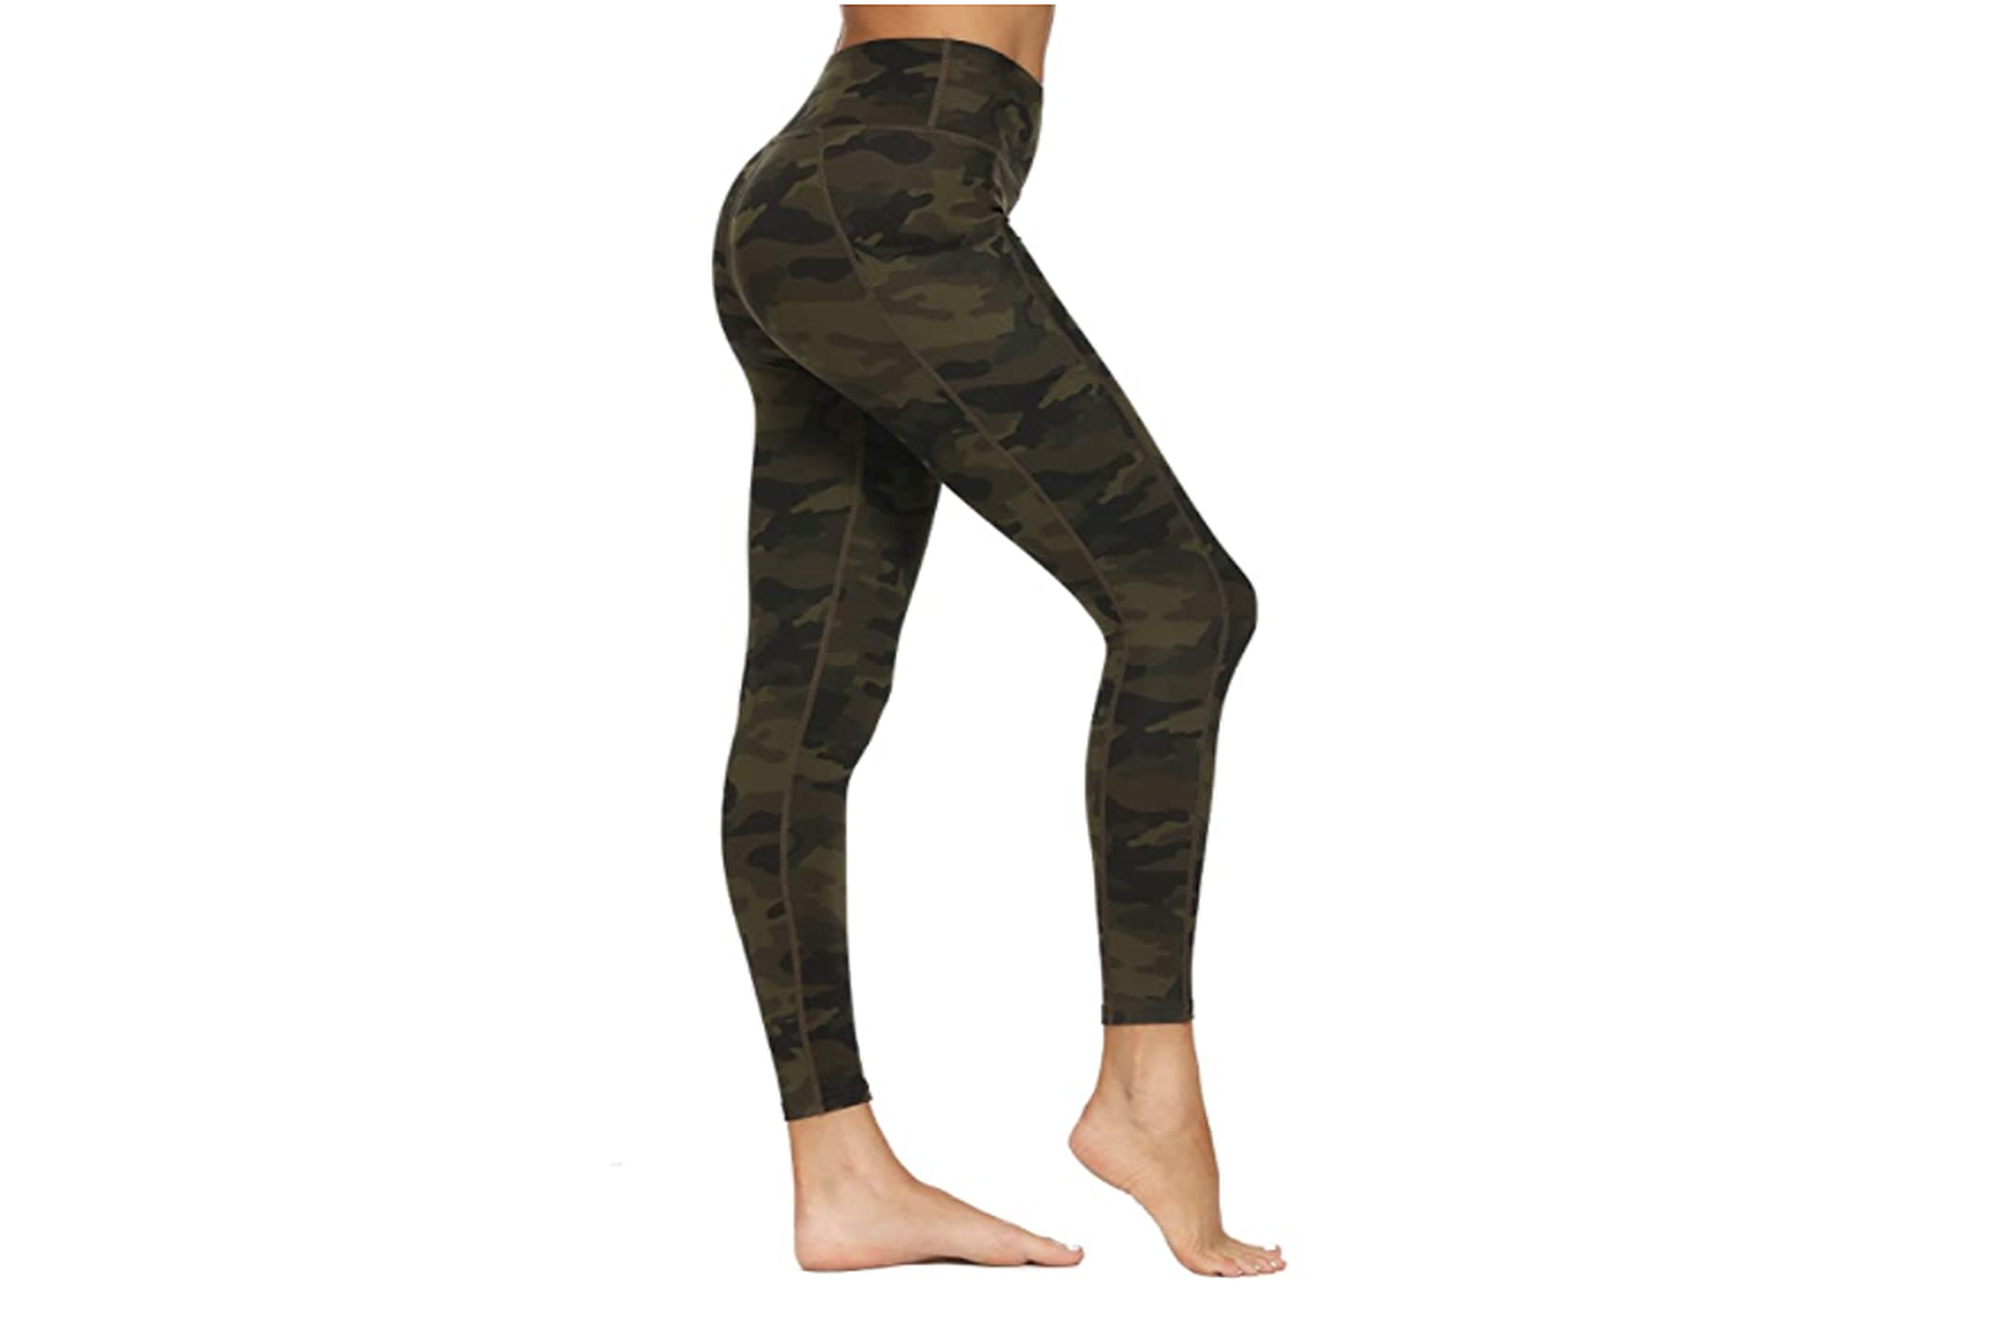 DEMOZU Womens High Waist Camo Yoga Leggings 7/8 Length Printed Workout Running Compression Pants with Pockets 